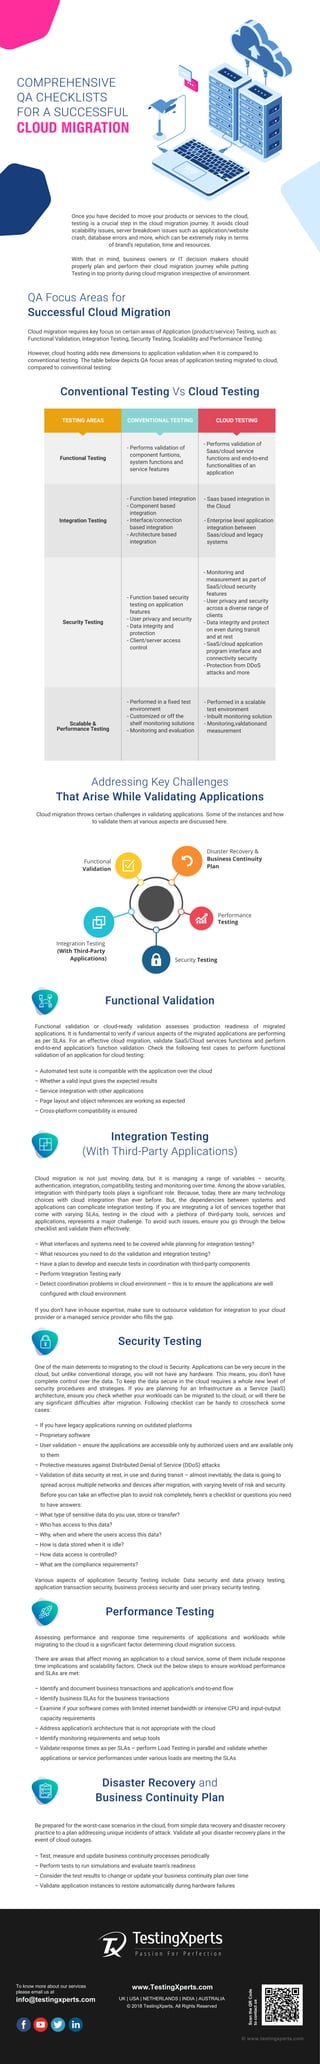 To know more about our services
please email us at
info@testingxperts.com
www.TestingXperts.com
UK | USA | NETHERLANDS | INDIA | AUSTRALIA
© 2018 TestingXperts, All Rights Reserved
ScantheQRCode
tocontactus
© www.testingxperts.com
COMPREHENSIVE
QA CHECKLISTS
FOR A SUCCESSFUL
CLOUD MIGRATION
QA Focus Areas for
Successful Cloud Migration
Conventional Testing Vs Cloud Testing
Addressing Key Challenges
That Arise While Validating Applications
Once you have decided to move your products or services to the cloud,
testing is a crucial step in the cloud migration journey. It avoids cloud
scalability issues, server breakdown issues such as application/website
crash, database errors and more, which can be extremely risky in terms
of brand’s reputation, time and resources.
With that in mind, business owners or IT decision makers should
properly plan and perform their cloud migration journey while putting
Testing in top priority during cloud migration irrespective of environment.
Cloud migration requires key focus on certain areas of Application (product/service) Testing, such as:
Functional Validation, Integration Testing, Security Testing, Scalability and Performance Testing.
However, cloud hosting adds new dimensions to application validation when it is compared to
conventional testing. The table below depicts QA focus areas of application testing migrated to cloud,
compared to conventional testing:
Cloud migration throws certain challenges in validating applications. Some of the instances and how
to validate them at various aspects are discussed here.
Functional Validation
Functional validation or cloud-ready validation assesses production readiness of migrated
applications. It is fundamental to verify if various aspects of the migrated applications are performing
as per SLAs. For an effective cloud migration, validate SaaS/Cloud services functions and perform
end-to-end application’s function validation. Check the following test cases to perform functional
validation of an application for cloud testing:
TESTING AREAS
Functional Testing
Integration Testing
CONVENTIONAL TESTING CLOUD TESTING
- Performs validation of
component funtions,
system functions and
service features
- Function based integration
- Component based
integration
- Interface/connection
based integration
- Architecture based
integration
- Saas based integration in
the Cloud
- Enterprise level application
integration between
Saas/cloud and legacy
systems
Scalable &
Performance Testing
- Performed in a fixed test
environment
- Customized or off the
shelf monitoring solutions
- Monitoring and evaluation
– Automated test suite is compatible with the application over the cloud
– Whether a valid input gives the expected results
– Service integration with other applications
– Page layout and object references are working as expected
– Cross-platform compatibility is ensured
Integration Testing
(With Third-Party Applications)
Cloud migration is not just moving data, but it is managing a range of variables – security,
authentication, integration, compatibility, testing and monitoring over time. Among the above variables,
integration with third-party tools plays a significant role. Because, today, there are many technology
choices with cloud integration than ever before. But, the dependencies between systems and
applications can complicate integration testing. If you are integrating a lot of services together that
come with varying SLAs, testing in the cloud with a plethora of third-party tools, services and
applications, represents a major challenge. To avoid such issues, ensure you go through the below
checklist and validate them effectively:
If you don’t have in-house expertise, make sure to outsource validation for integration to your cloud
provider or a managed service provider who fills the gap.
Various aspects of application Security Testing include: Data security and data privacy testing,
application transaction security, business process security and user privacy security testing.
– What interfaces and systems need to be covered while planning for integration testing?
– What resources you need to do the validation and integration testing?
– Have a plan to develop and execute tests in coordination with third-party components
– Perform Integration Testing early
– Detect coordination problems in cloud environment – this is to ensure the applications are well
configured with cloud environment
Security Testing
One of the main deterrents to migrating to the cloud is Security. Applications can be very secure in the
cloud, but unlike conventional storage, you will not have any hardware. This means, you don’t have
complete control over the data. To keep the data secure in the cloud requires a whole new level of
security procedures and strategies. If you are planning for an Infrastructure as a Service (IaaS)
architecture, ensure you check whether your workloads can be migrated to the cloud; or will there be
any significant difficulties after migration. Following checklist can be handy to crosscheck some
cases:
– If you have legacy applications running on outdated platforms
– Proprietary software
– User validation – ensure the applications are accessible only by authorized users and are available only
to them
– Protective measures against Distributed Denial of Service (DDoS) attacks
– Validation of data security at rest, in use and during transit – almost inevitably, the data is going to
spread across multiple networks and devices after migration, with varying levels of risk and security.
Before you can take an effective plan to avoid risk completely, here’s a checklist or questions you need
to have answers:
– What type of sensitive data do you use, store or transfer?
– Who has access to this data?
– Why, when and where the users access this data?
– How is data stored when it is idle?
– How data access is controlled?
– What are the compliance requirements?
Performance Testing
Assessing performance and response time requirements of applications and workloads while
migrating to the cloud is a significant factor determining cloud migration success.
There are areas that affect moving an application to a cloud service, some of them include response
time implications and scalability factors. Check out the below steps to ensure workload performance
and SLAs are met:
– Identify and document business transactions and application’s end-to-end flow
– Identify business SLAs for the business transactions
– Examine if your software comes with limited internet bandwidth or intensive CPU and input-output
capacity requirements
– Address application’s architecture that is not appropriate with the cloud
– Identify monitoring requirements and setup tools
– Validate response times as per SLAs – perform Load Testing in parallel and validate whether
applications or service performances under various loads are meeting the SLAs
Disaster Recovery and
Business Continuity Plan
Be prepared for the worst-case scenarios in the cloud, from simple data recovery and disaster recovery
practice to a plan addressing unique incidents of attack. Validate all your disaster recovery plans in the
event of cloud outages.
– Test, measure and update business continuity processes periodically
– Perform tests to run simulations and evaluate team’s readiness
– Consider the test results to change or update your business continuity plan over time
– Validate application instances to restore automatically during hardware failures
- Performed in a scalable
test environment
- Inbuilt monitoring solution
- Monitoring,valdationand
measurement
- Performs validation of
Saas/cloud service
functions and end-to-end
functionalities of an
application
Security Testing
- Function based security
testing on application
features
- User privacy and security
- Data integrity and
protection
- Client/server access
control
- Monitoring and
measurement as part of
SaaS/cloud security
features
- User privacy and security
across a diverse range of
clients
- Data integrity and protect
on even during transit
and at rest
- SaaS/cloud applcation
program interface and
connectivity security
- Protection from DDoS
attacks and more
Security Testing
Performance
Testing
Disaster Recovery &
Business Continuity
Plan
Integration Testing
(With Third-Party
Applications)
Functional
Validation
 